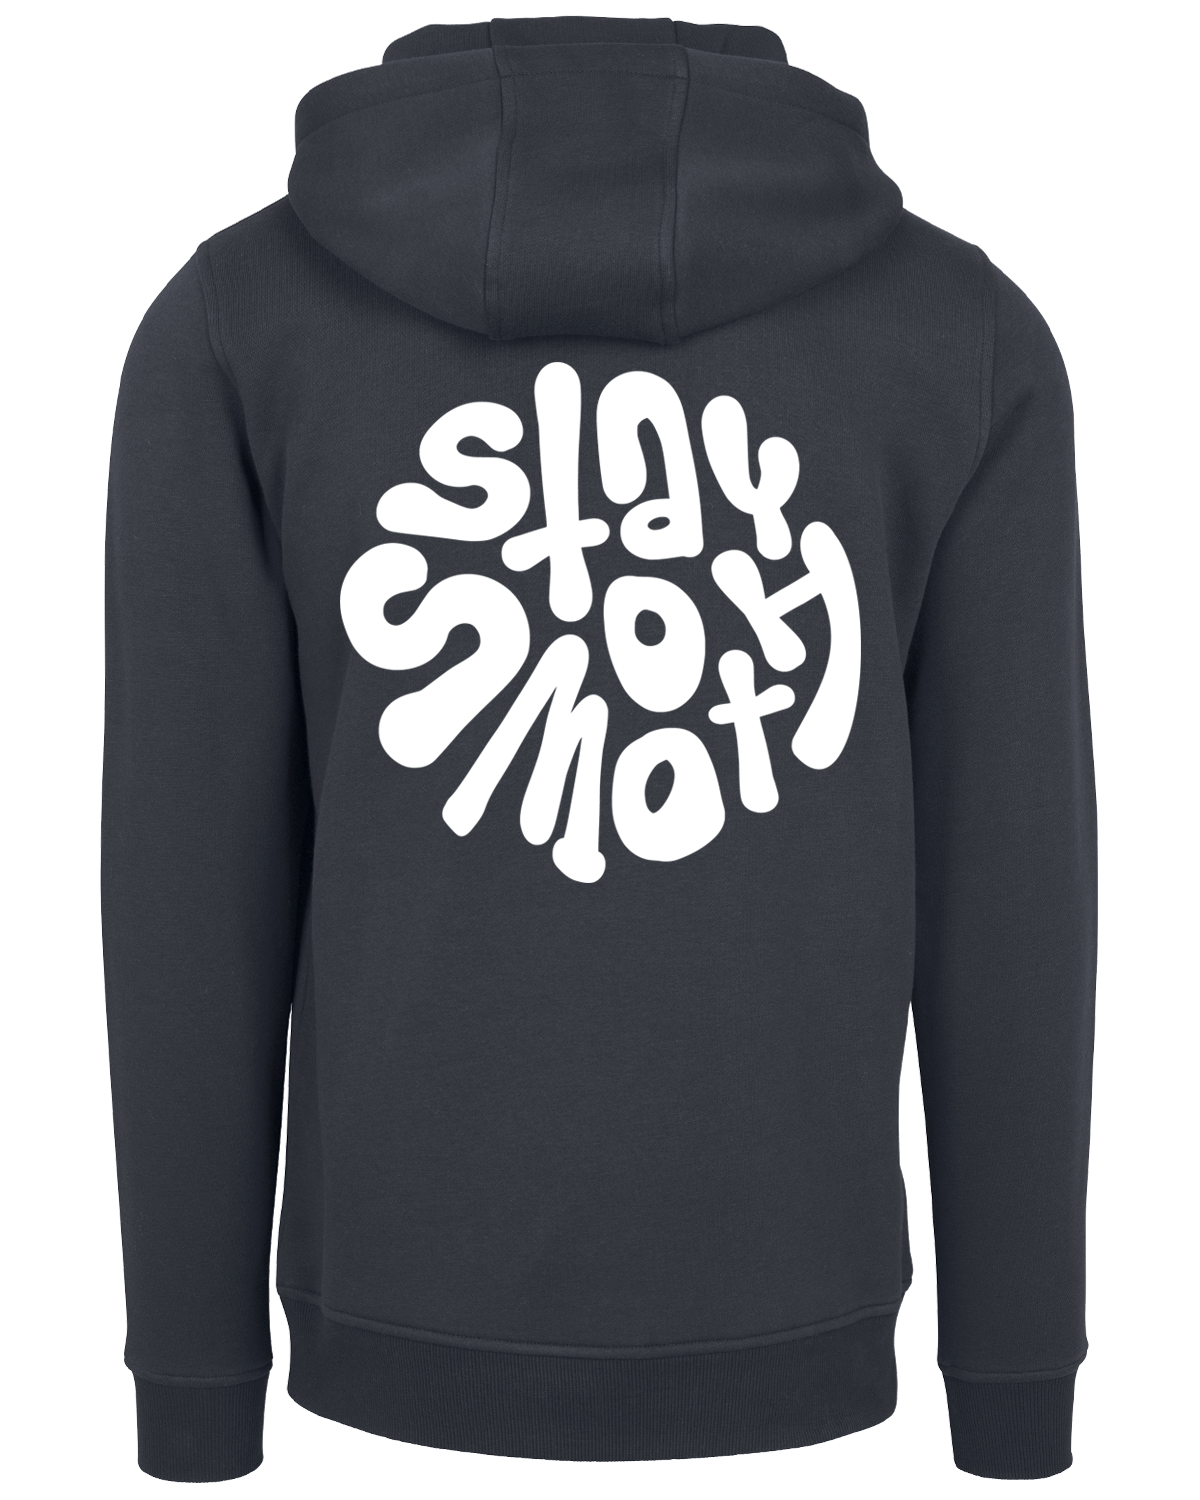 Ink Blue Hoodie / Stay Smooth White Front+Back Women